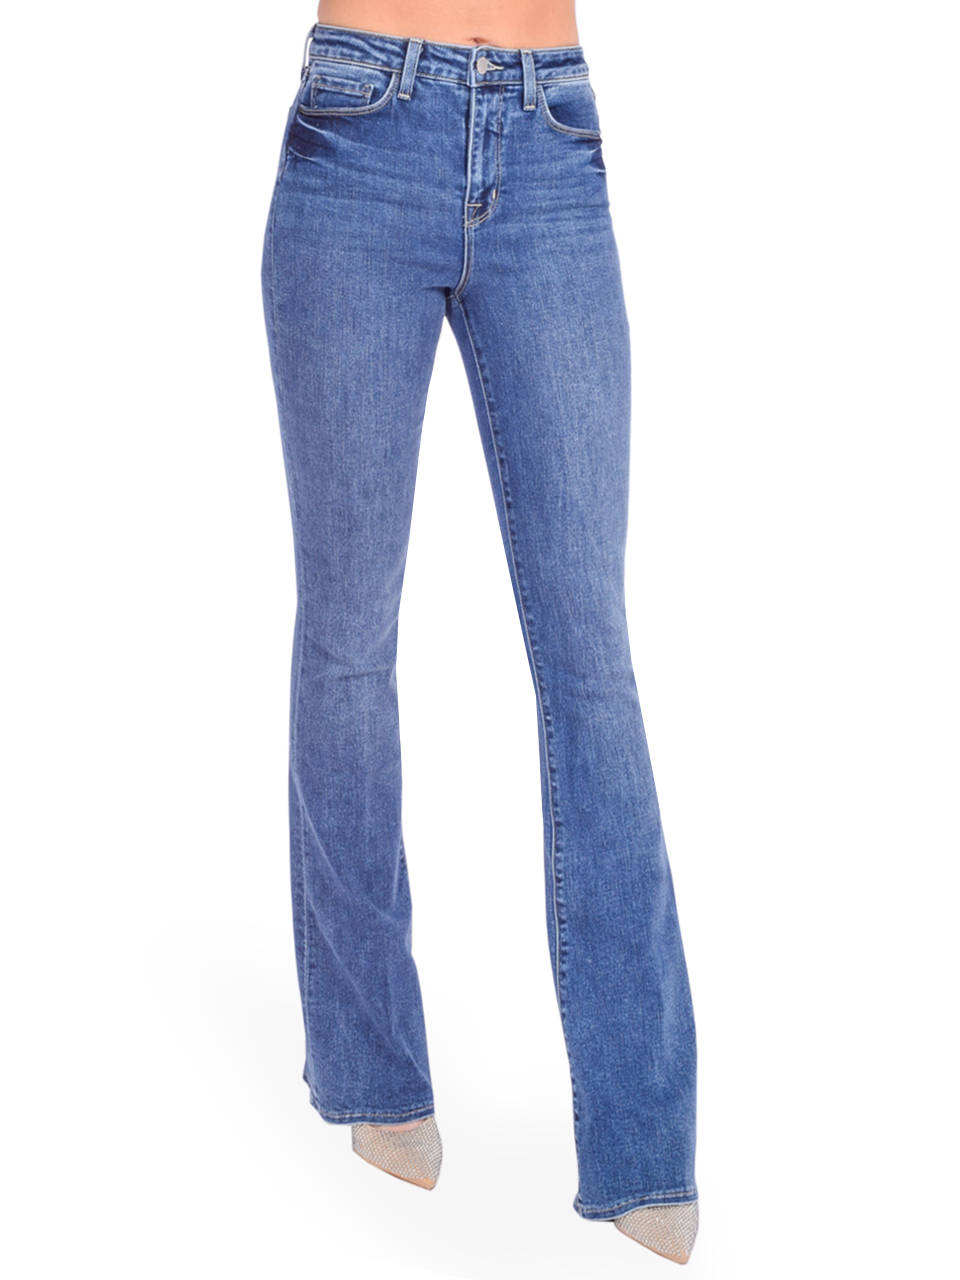 L'AGENCE Marty High Rise Flare Jeans in Rowan Blue Side View 

